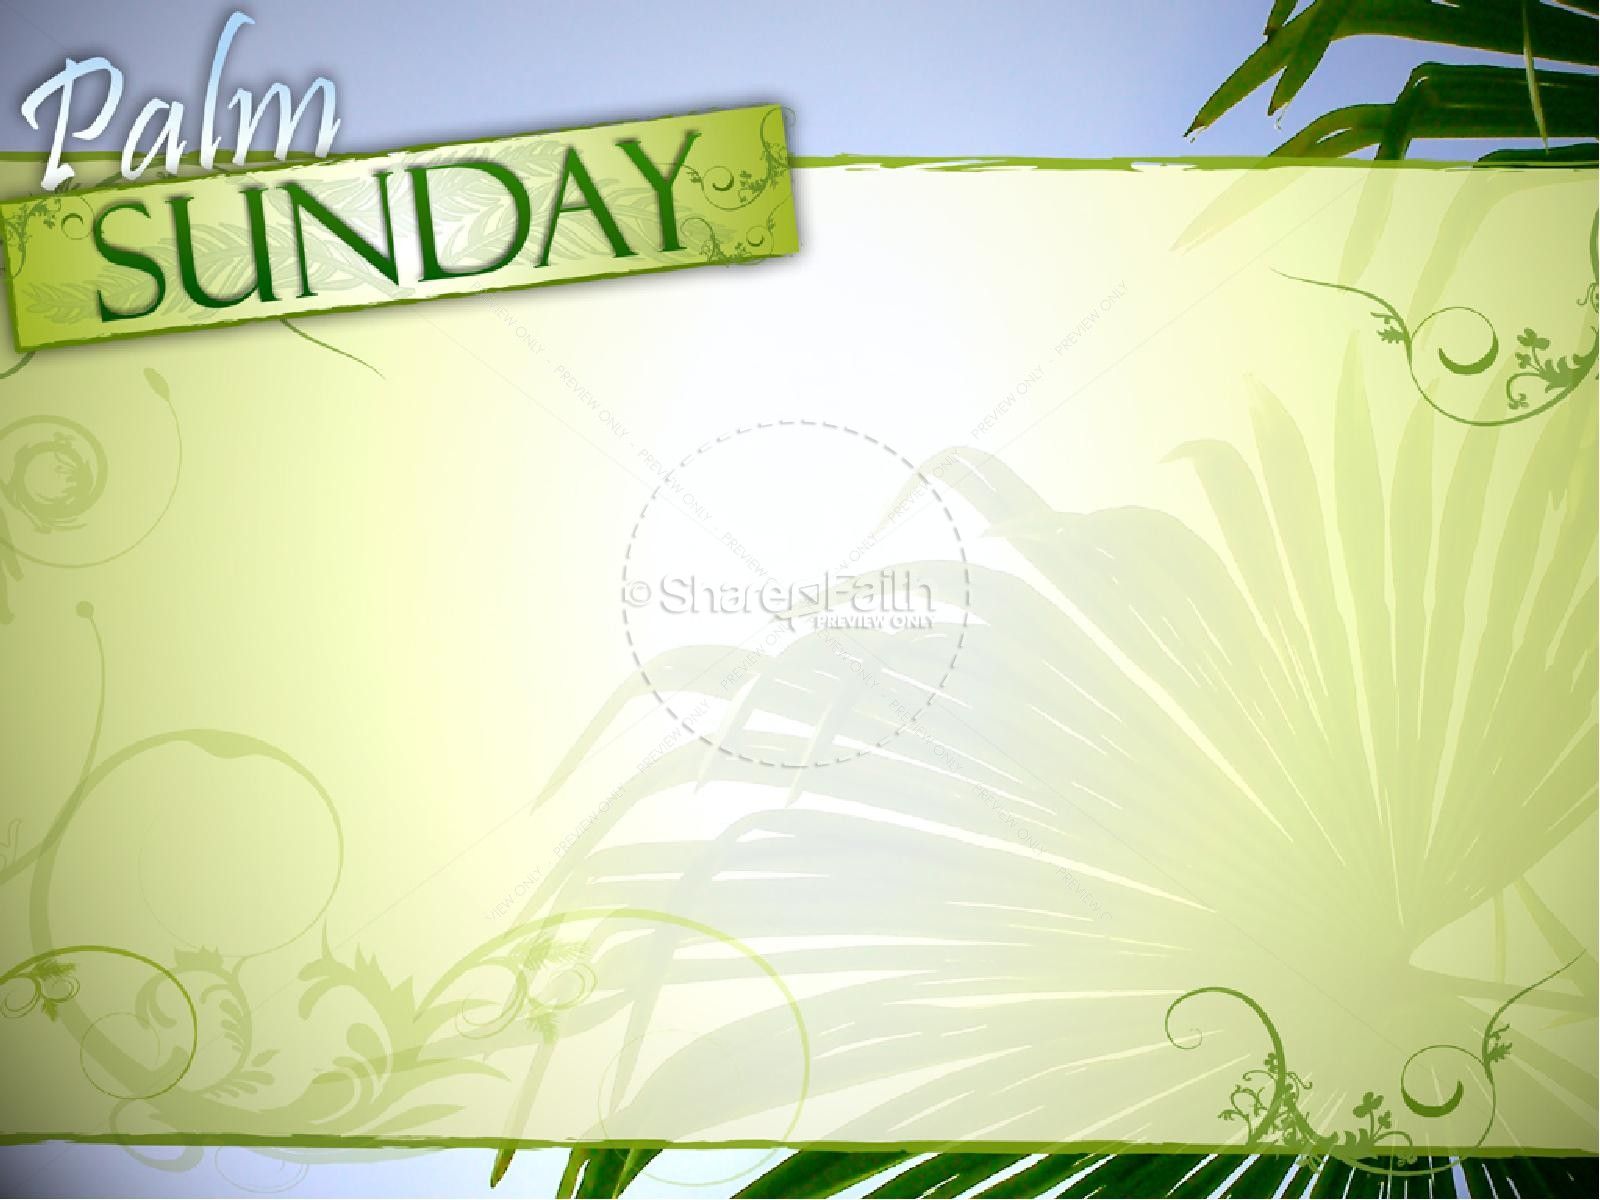 Palm Sunday Backgrounda. Emoji Palm Tree Wallpaper, Indie Palm Trees Wallpaper and Napalm Death Wallpaper